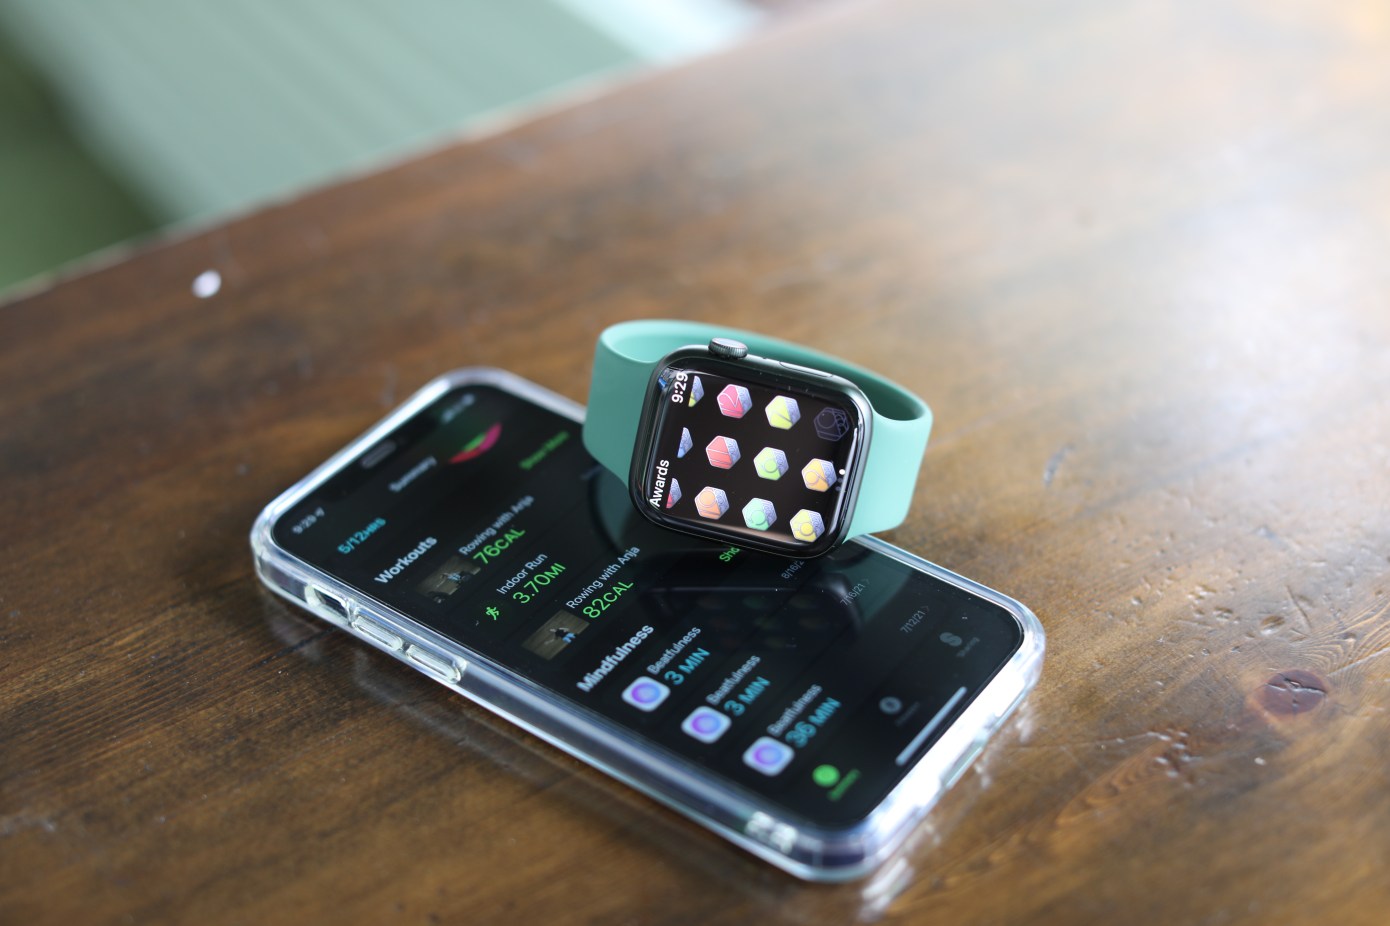 iPhone and Apple watch - photo by Brian Heater